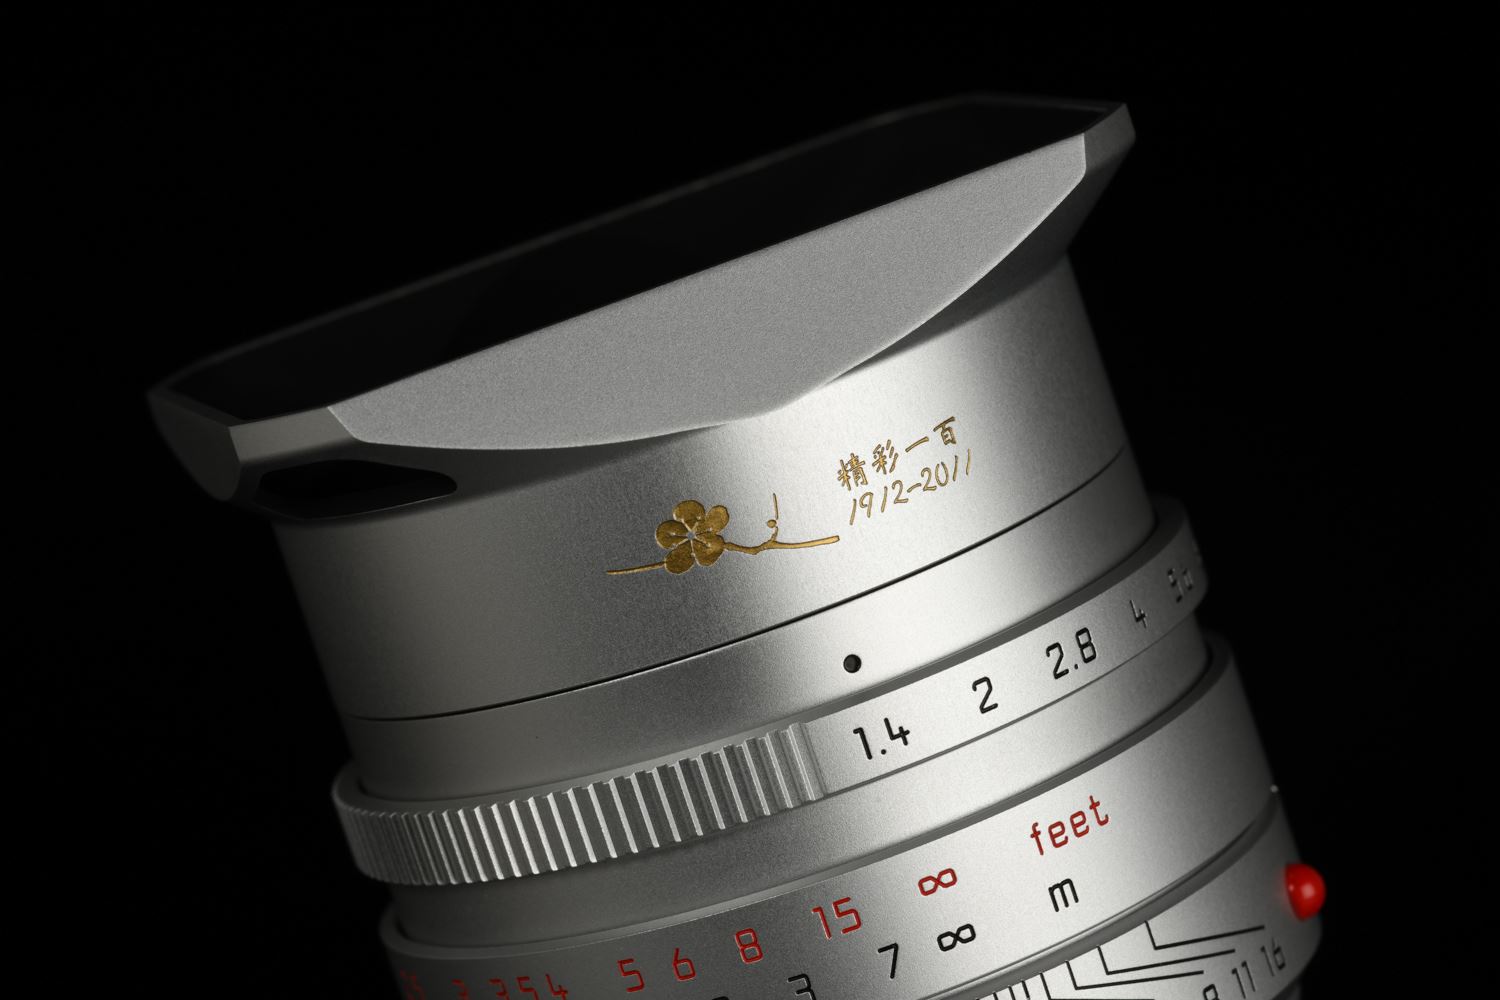 Picture of Leica MP Republic of China Centennial Limited Edition Set